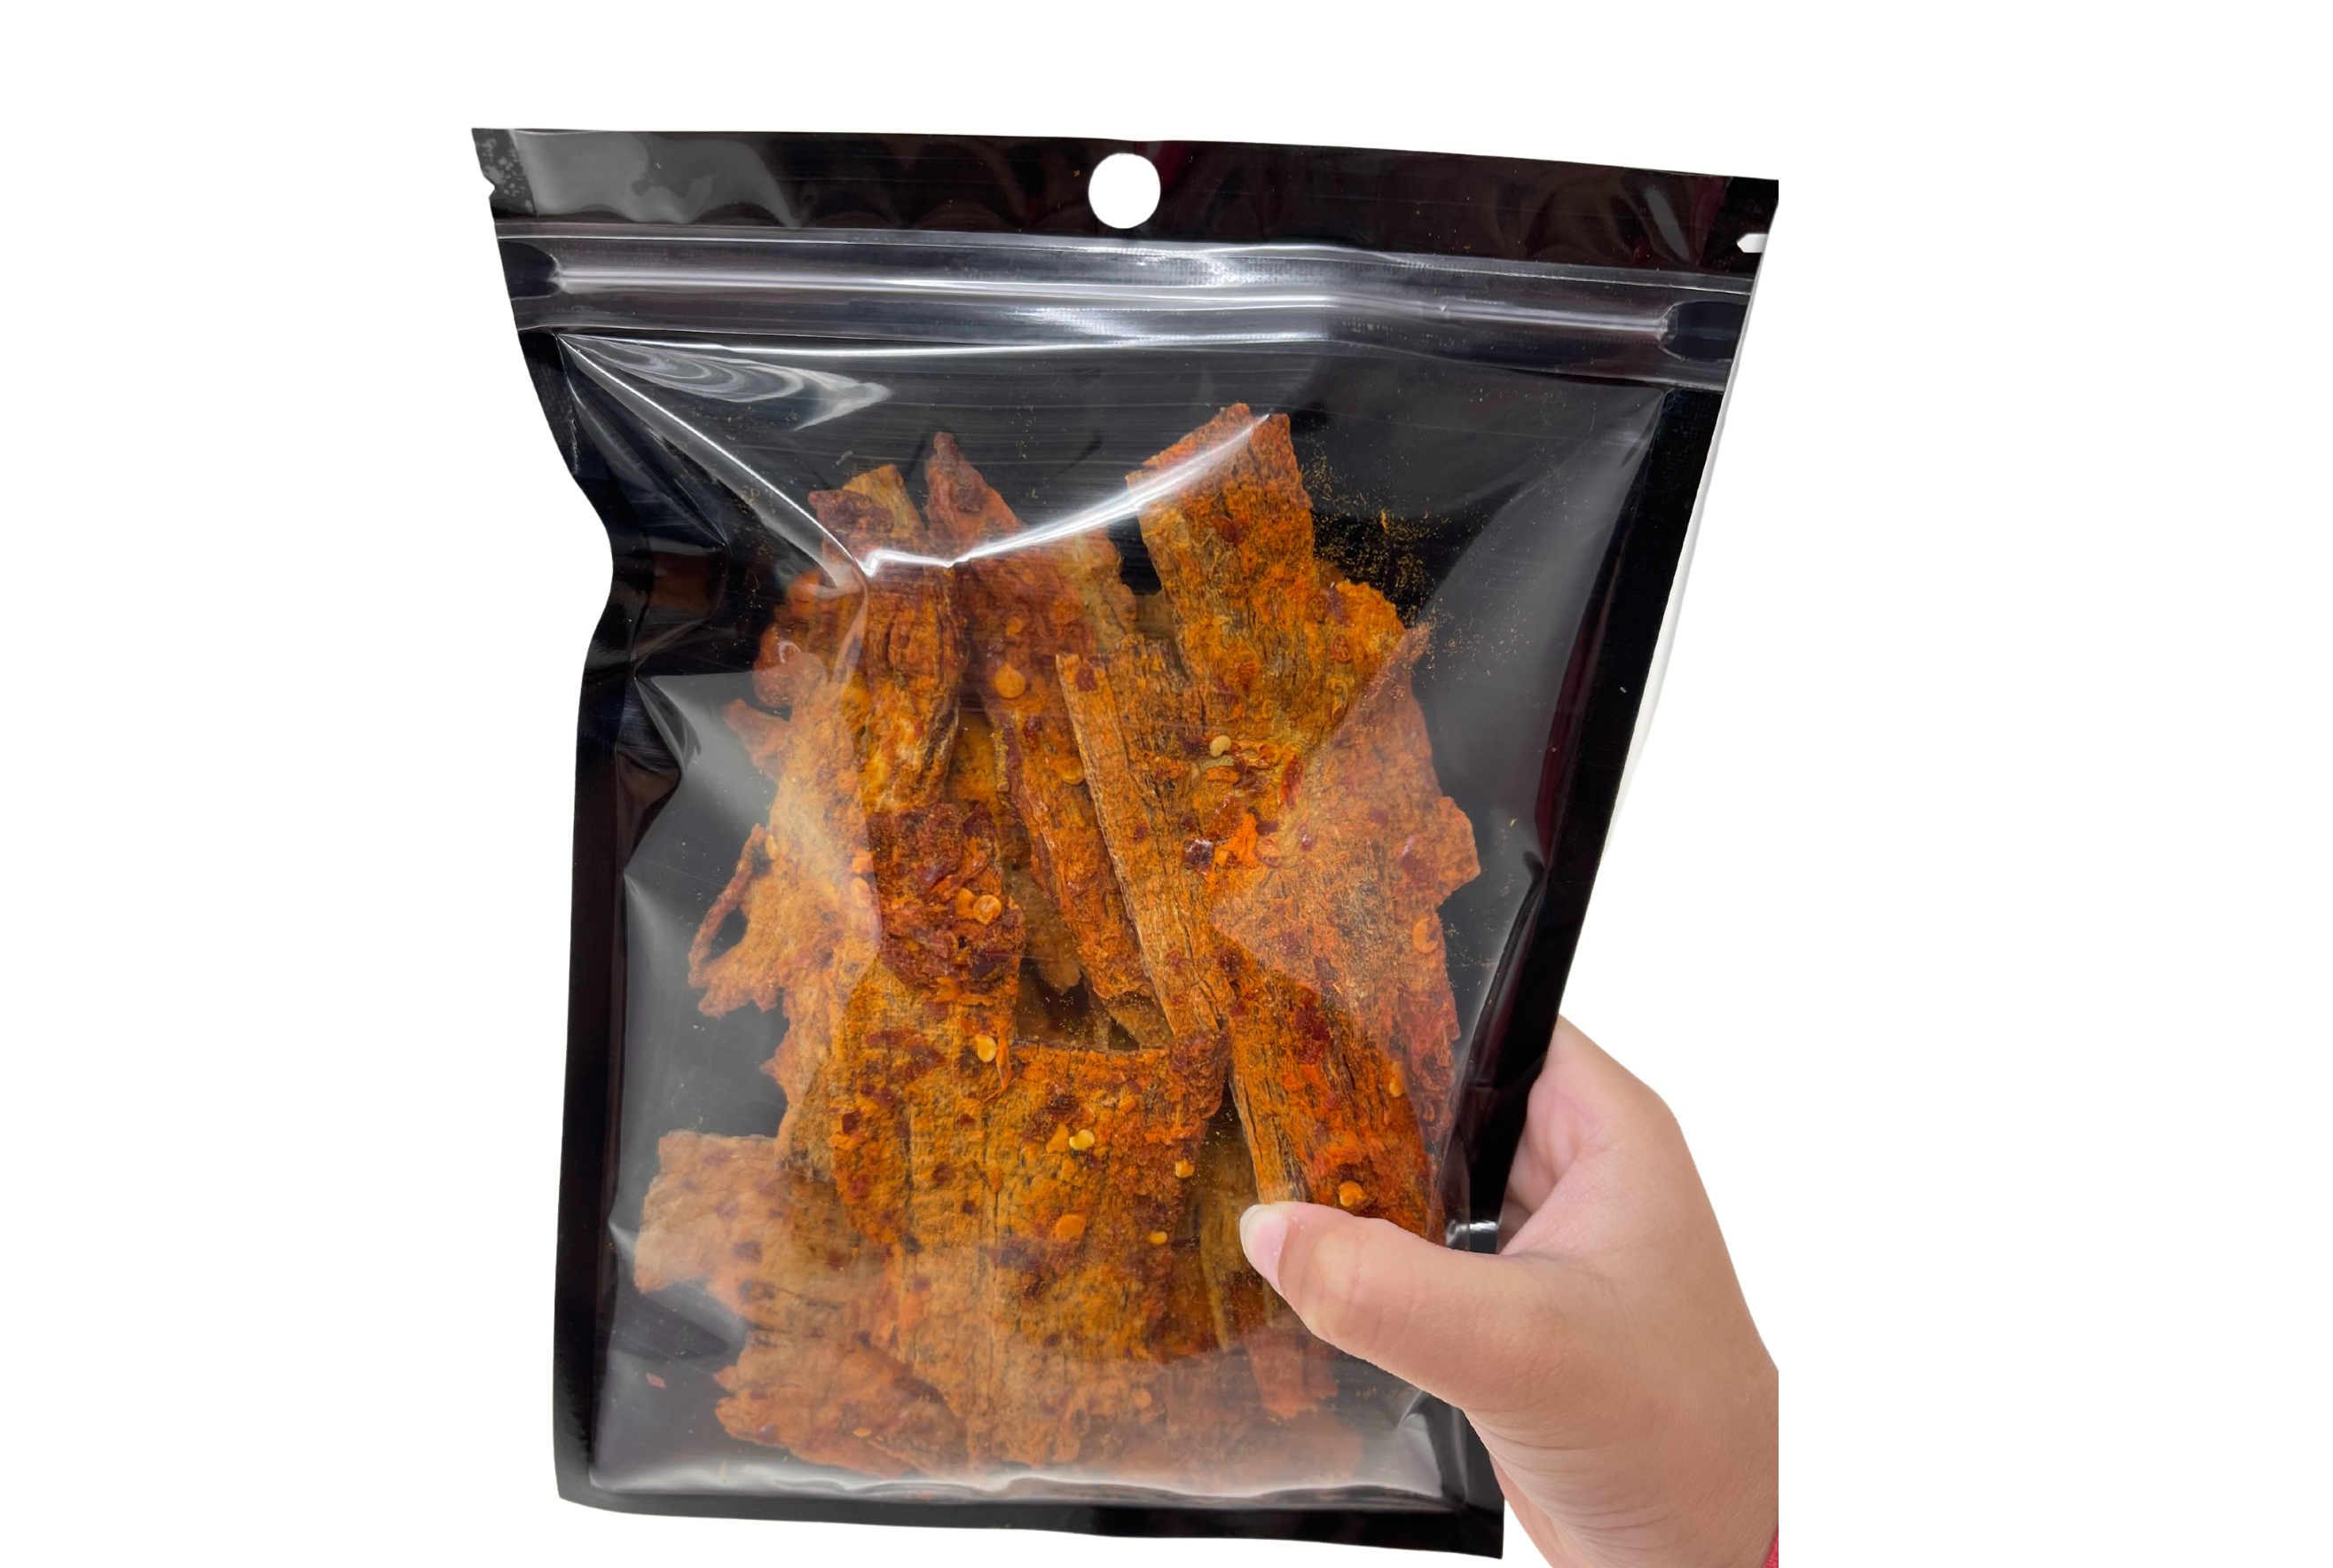 Spiced Crispy Curry Beef Jerky Simple and Delicious Rich Traditional Flavor of The Homeland - 3 Oz (85 gram) 100% American Beef Made in USA